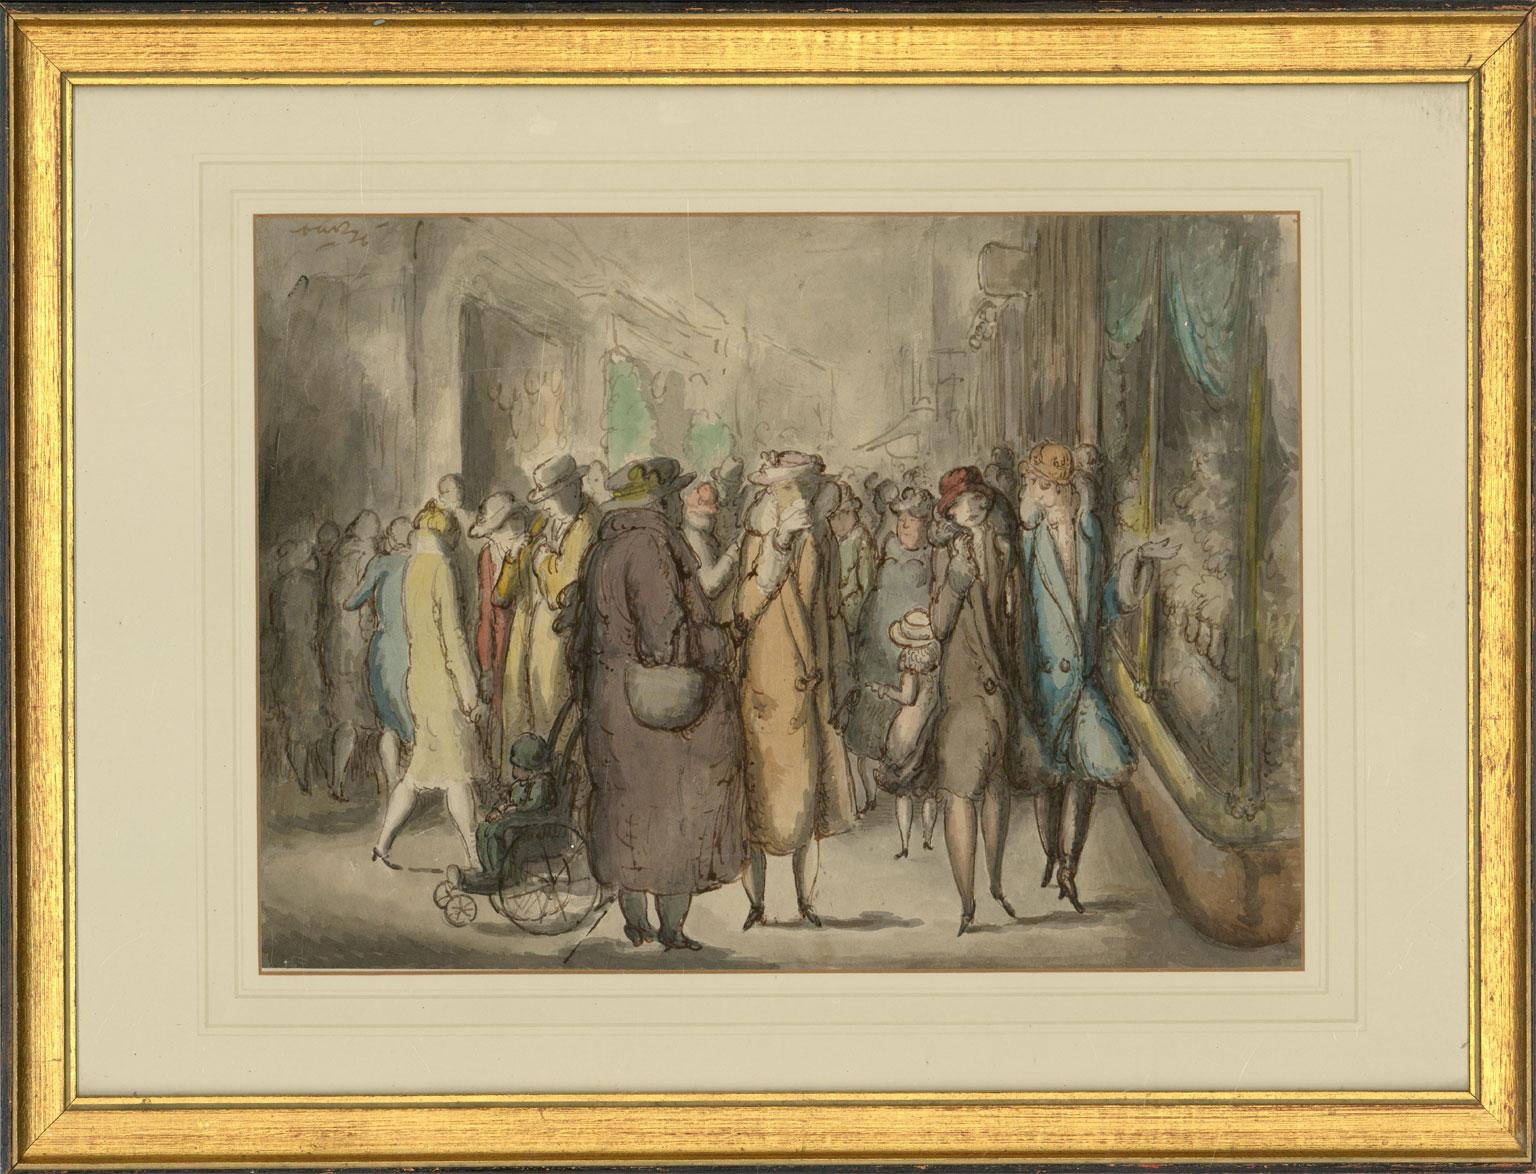 A fantastic view of shoppers on a street, likely Tunbridge Wells or Brighton, both places where Harold Hope Read lived for a time - he enjoyed drawing the fashionable ladies outside the department stores in Tunbridge Wells in particular. This scene